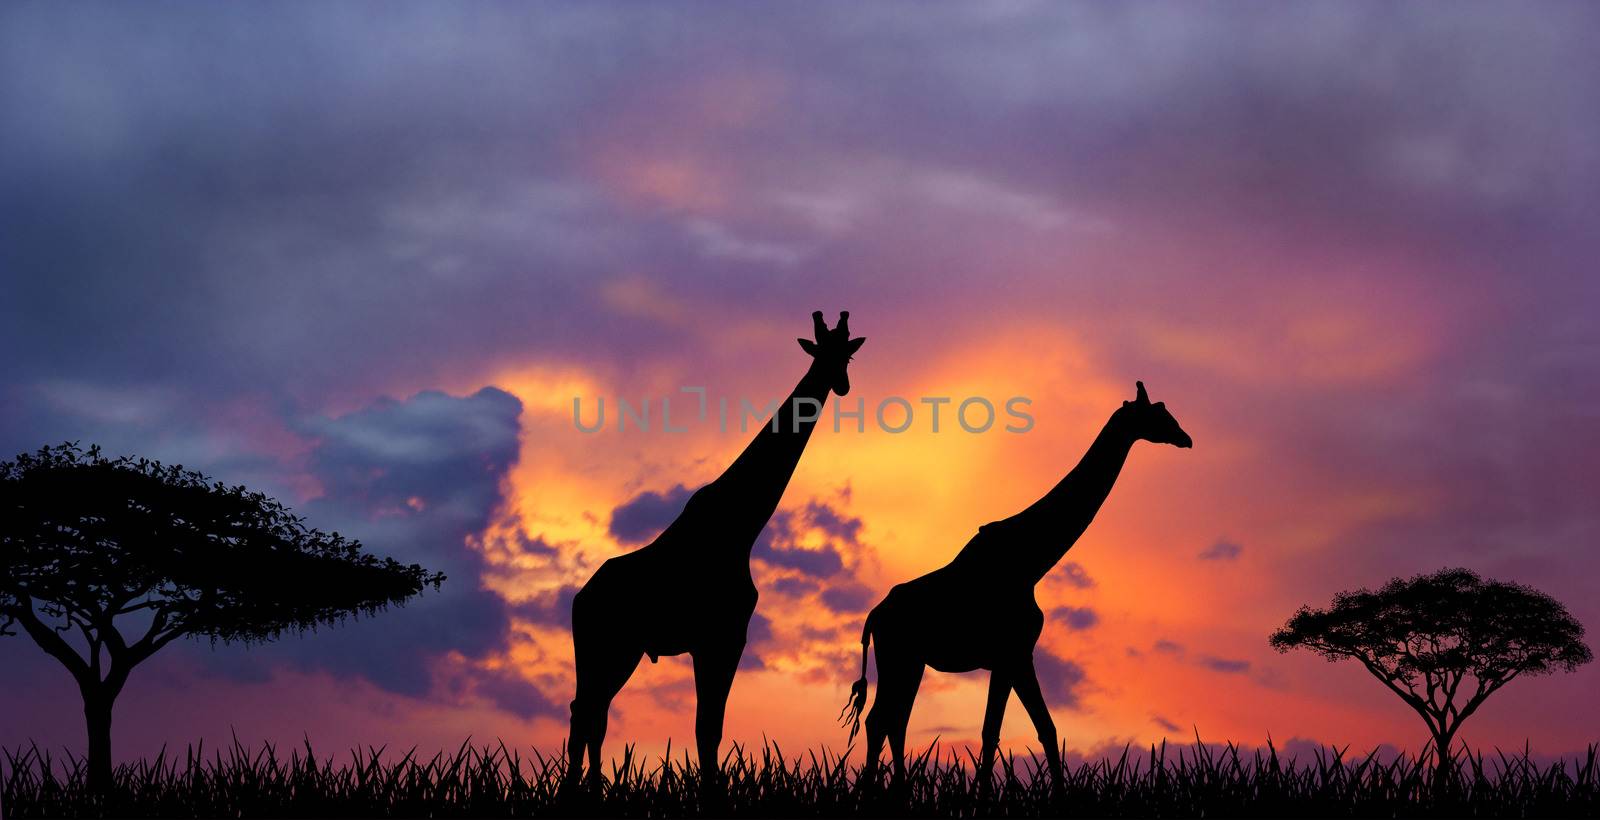 Silhouettes of two giraffes against a sunset. Giraffes and evening sunset.                                                             